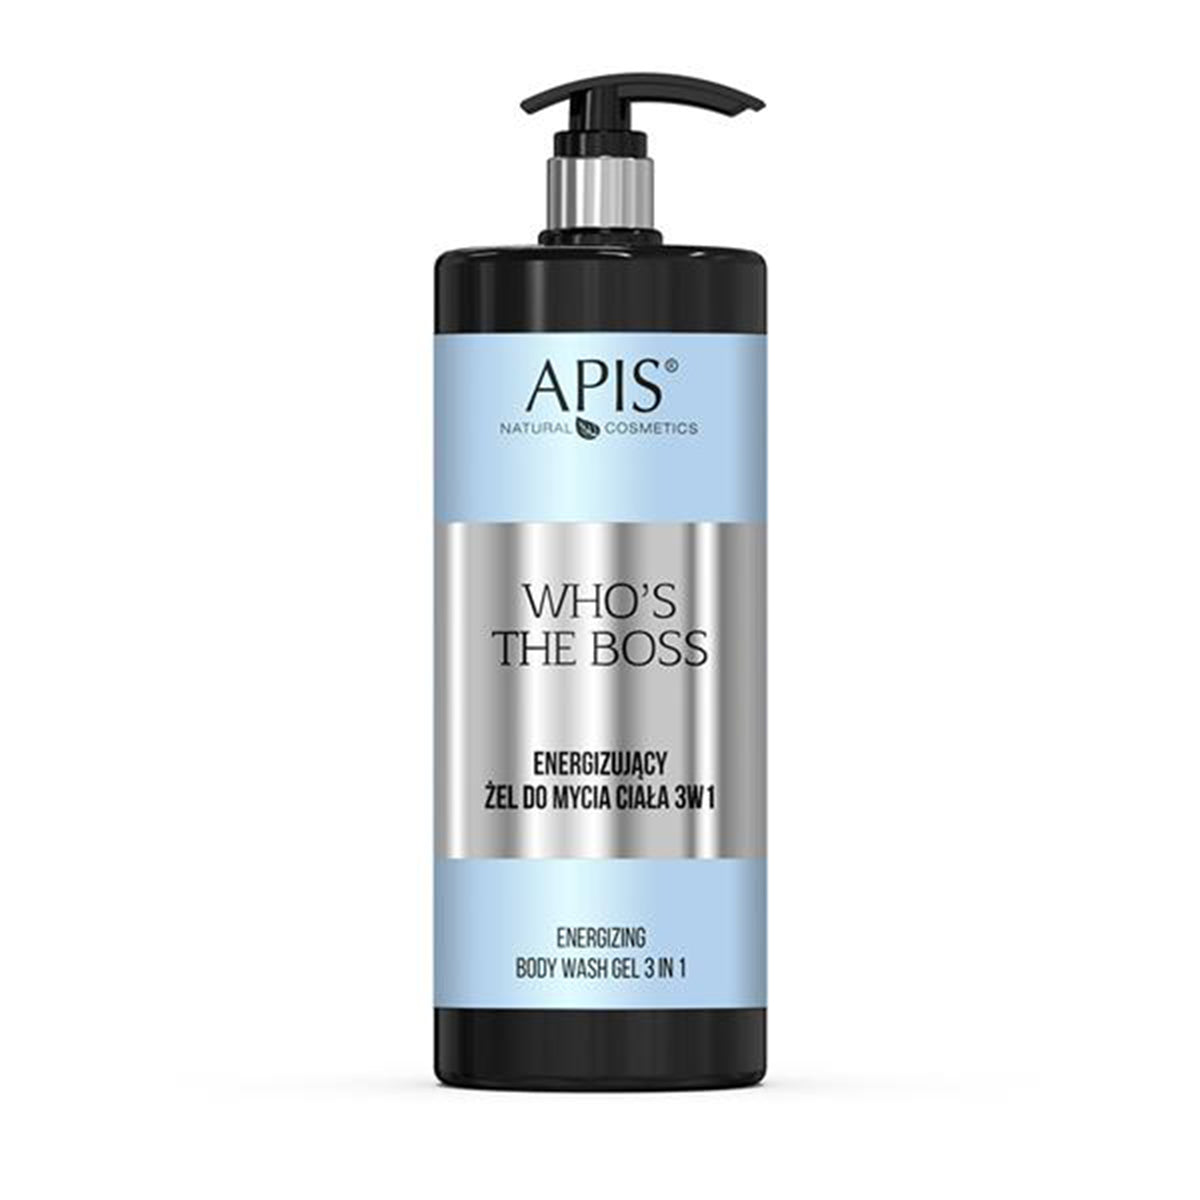 Apis who's the boss stimulerende body wasgel 3in1 1l